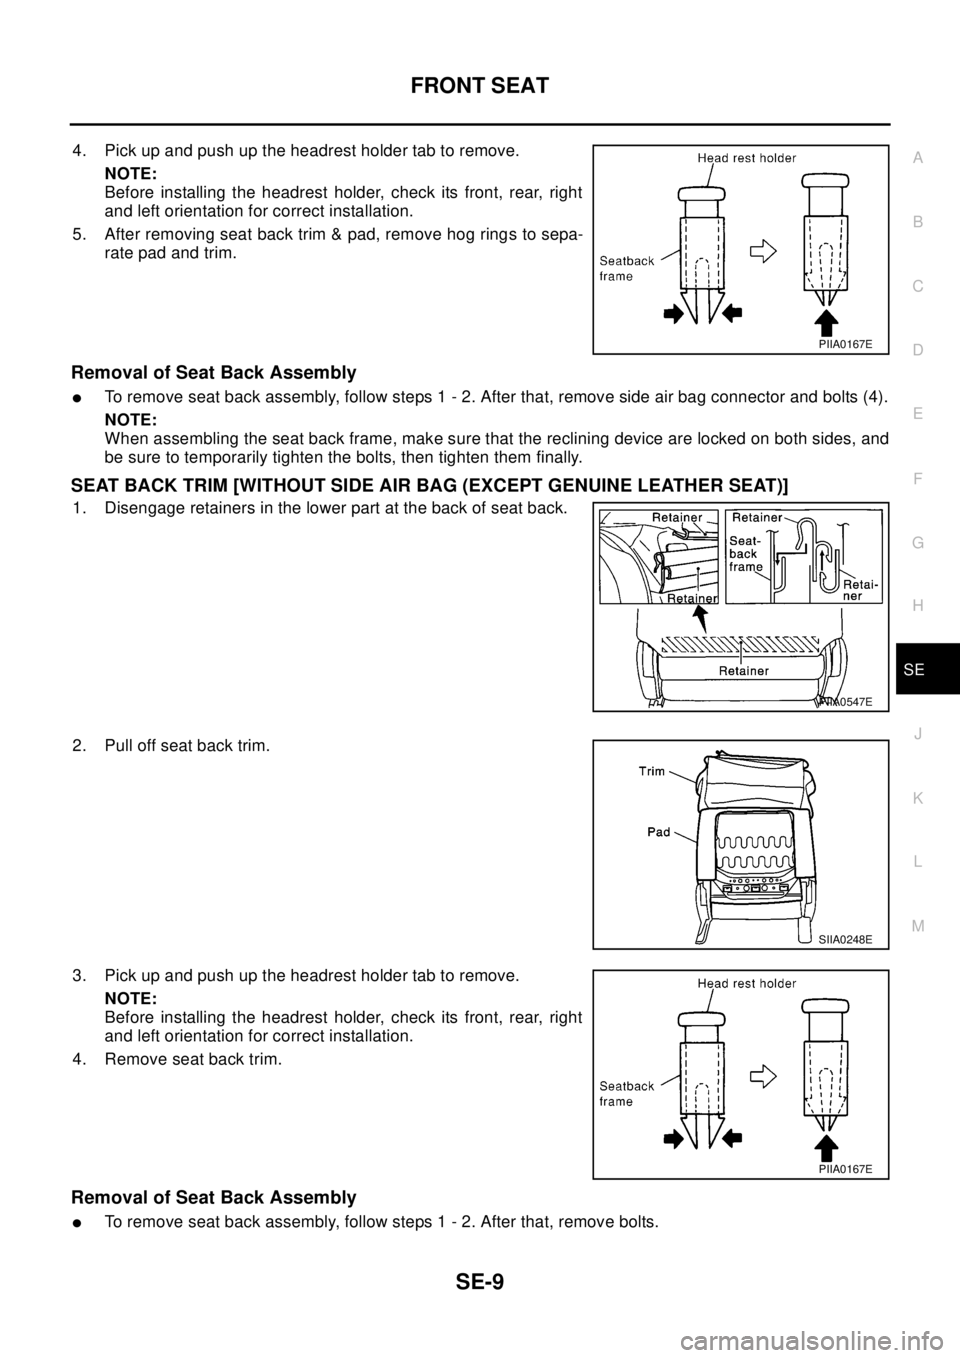 NISSAN X-TRAIL 2003  Electronic Repair Manual FRONT SEAT
SE-9
C
D
E
F
G
H
J
K
L
MA
B
SE
4. Pick up and push up the headrest holder tab to remove.
NOTE:
Before installing the headrest holder, check its front, rear, right
and left orientation for c